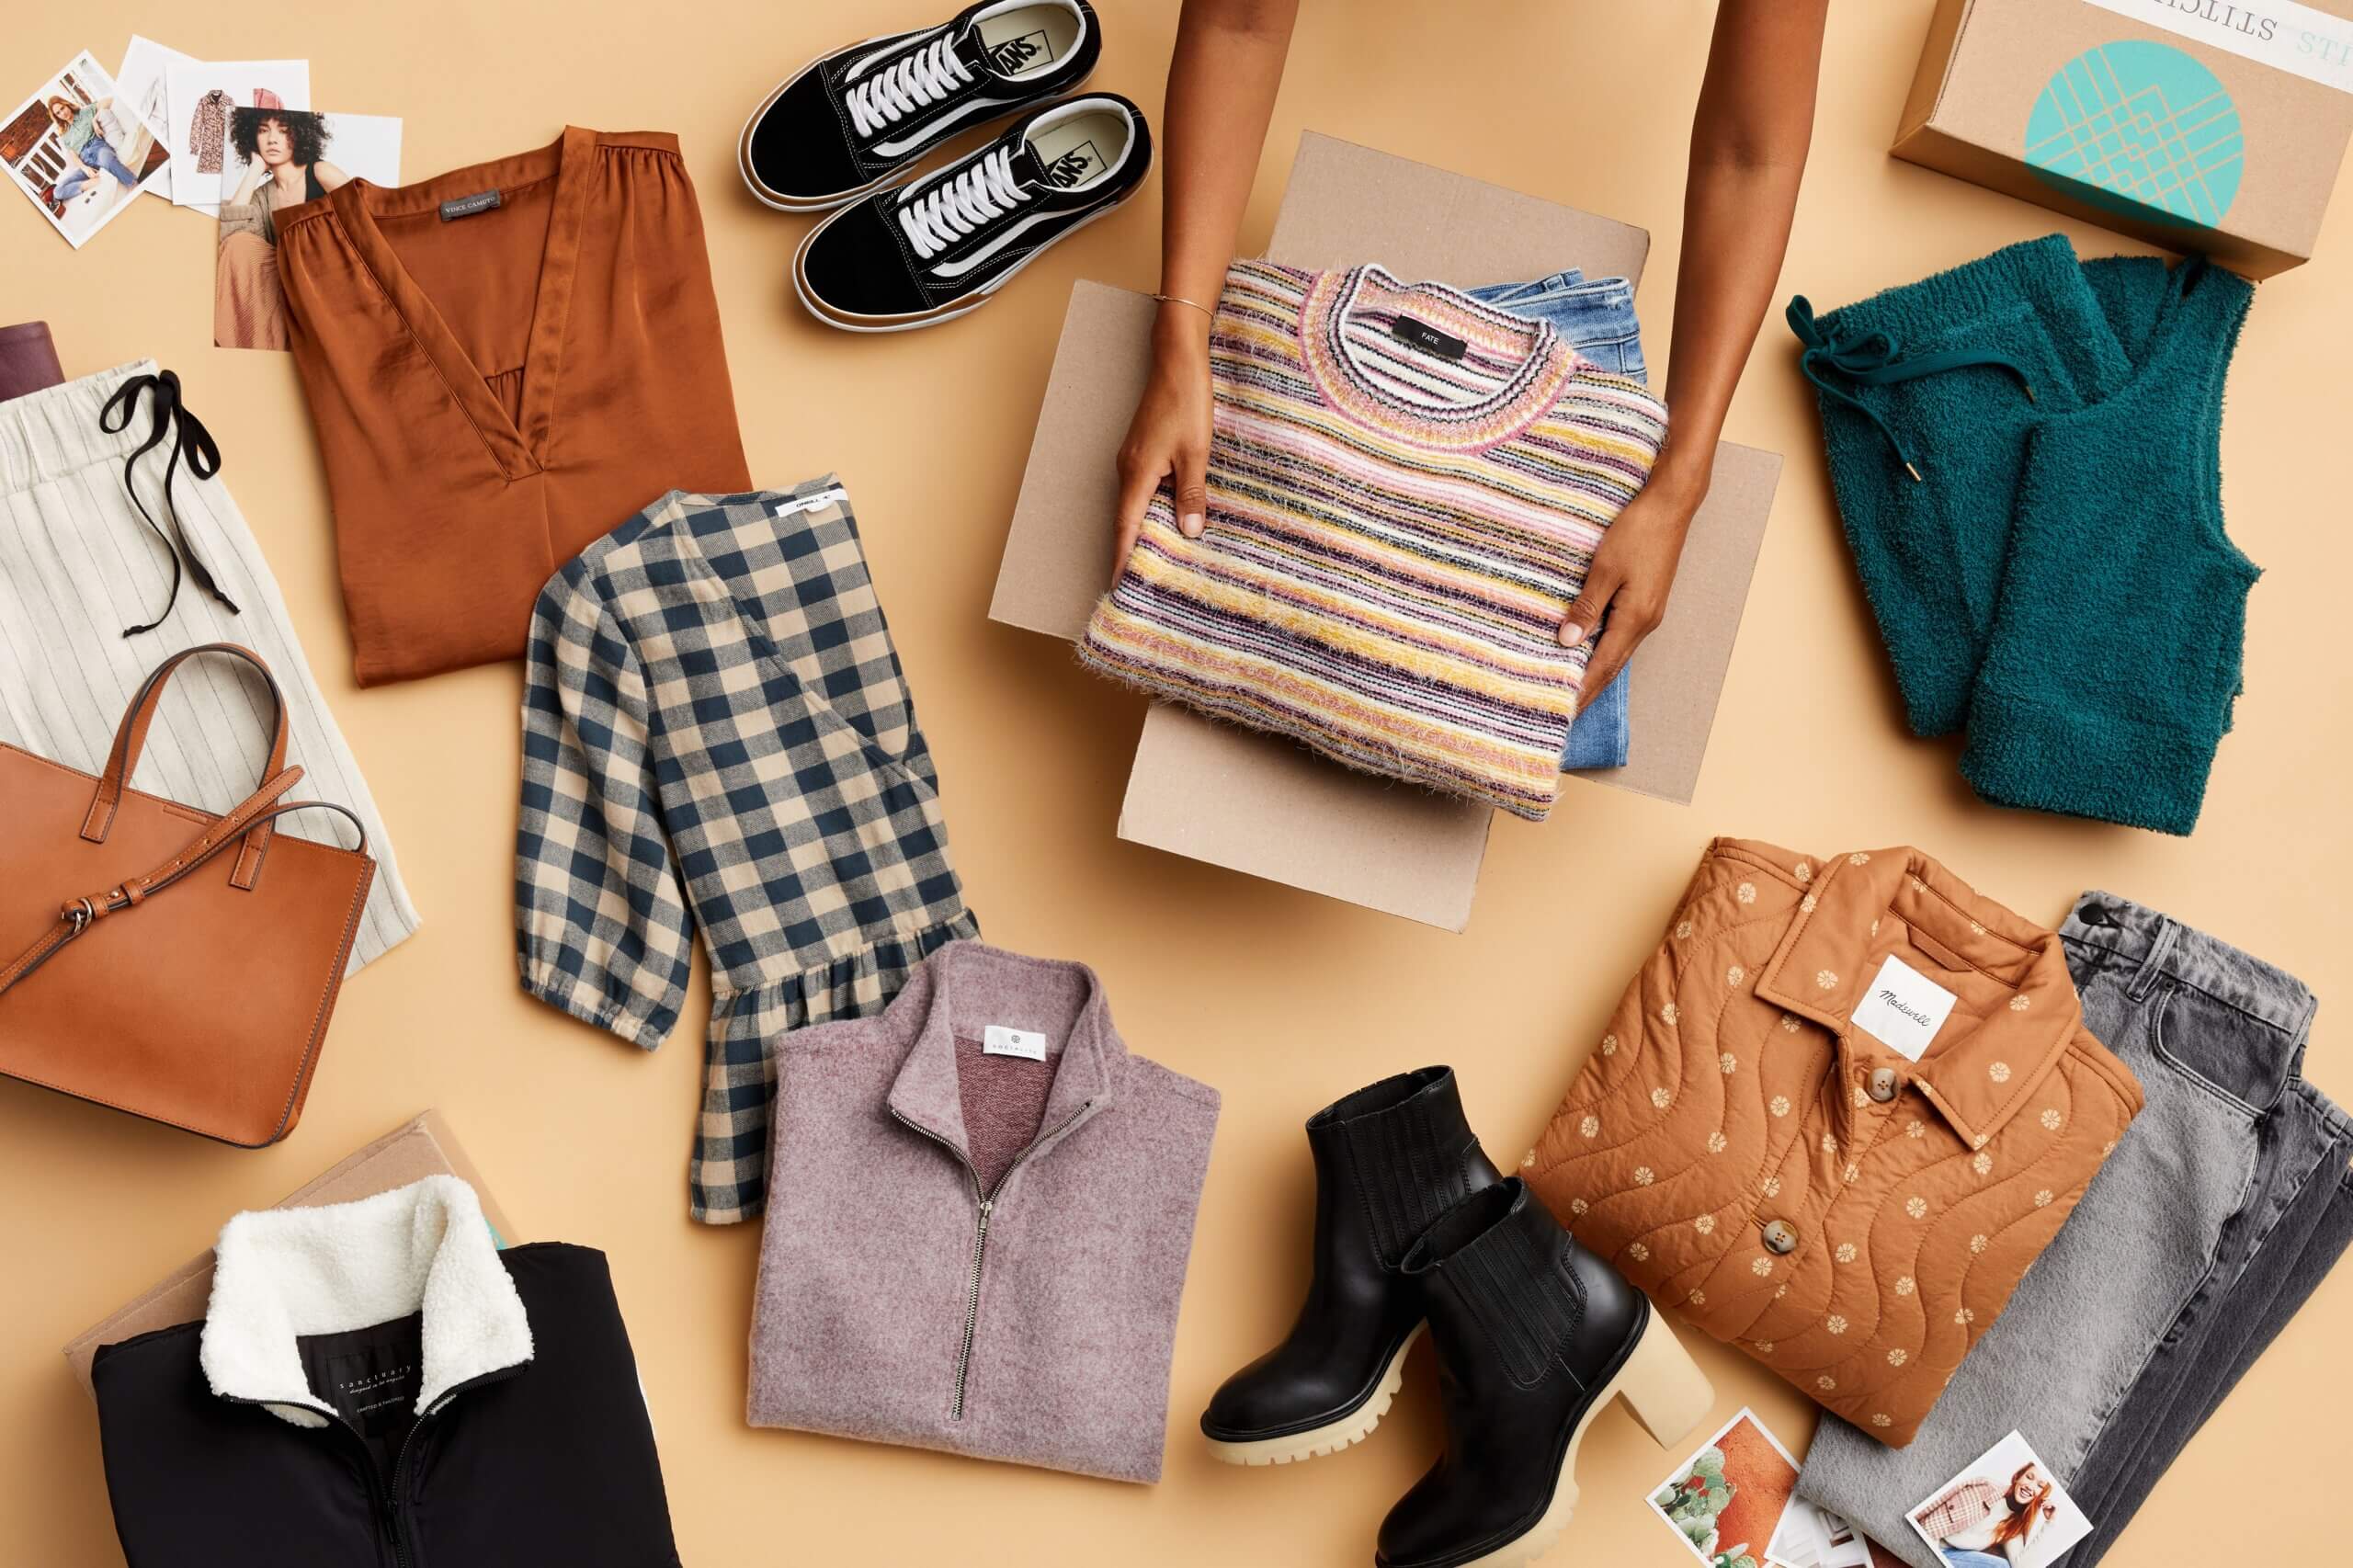 Stitch Fix women’s laydown featuring folded sweater and jeans in Stitch Fix delivery box next to black Vans sneakers, blouses in burnt orange and black plaid, cream pants, cognac tote, black sherpa pullover, purple knit top, black heeled booties, orange quilted jacket, faded blue jeans and green fuzzy lounge pants.